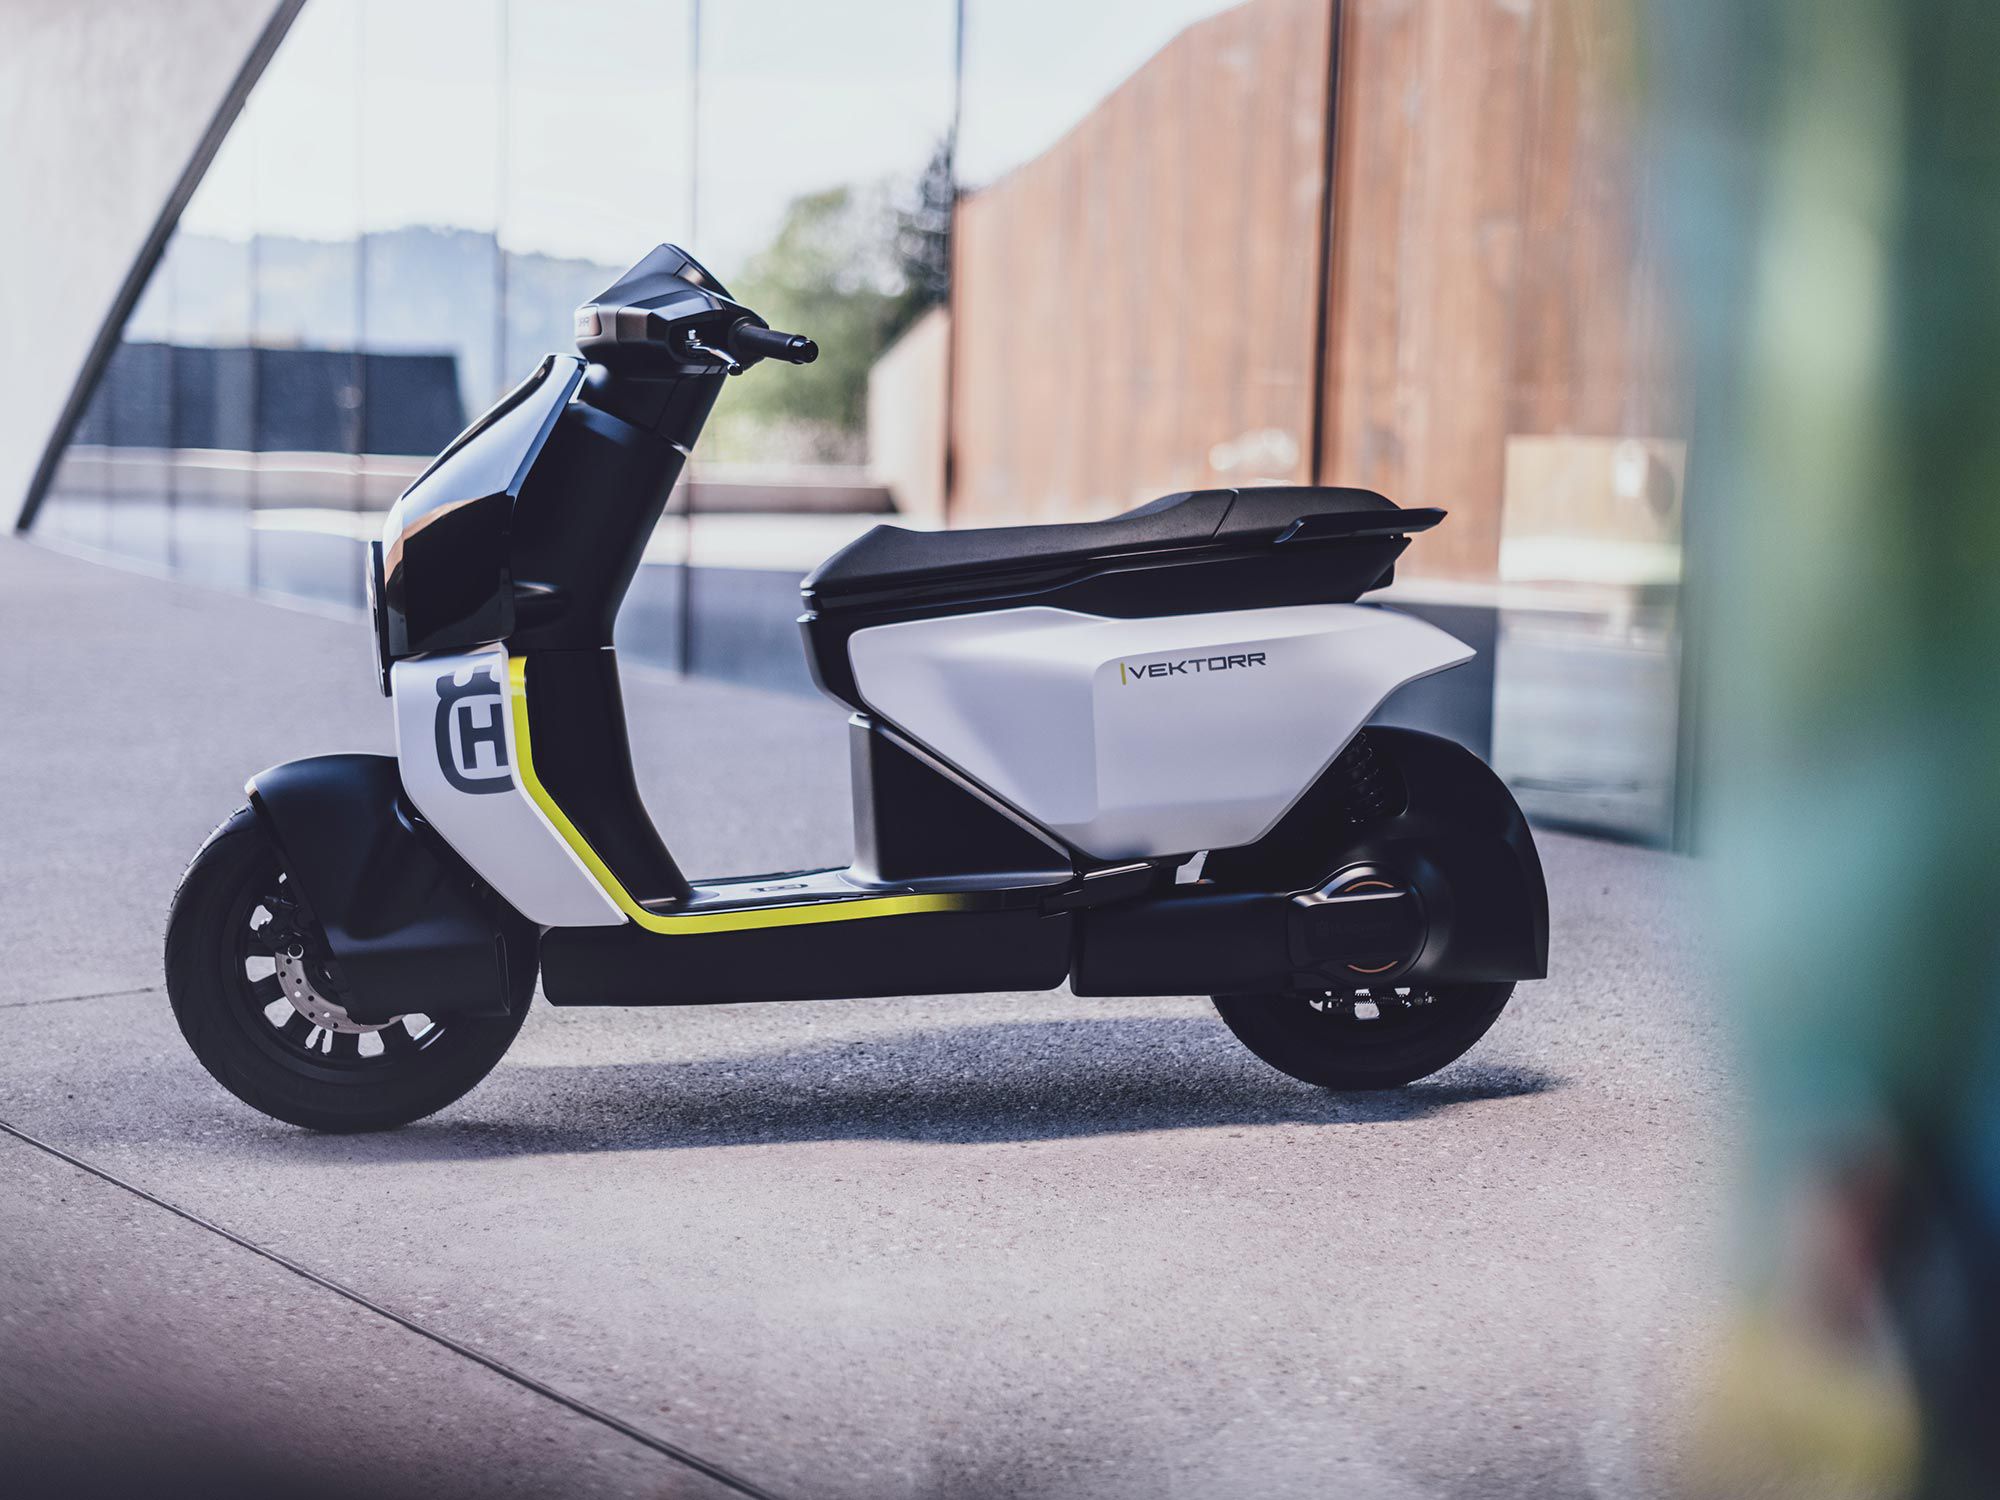 No word yet on when and where the Vektorr electric scooter will be available.